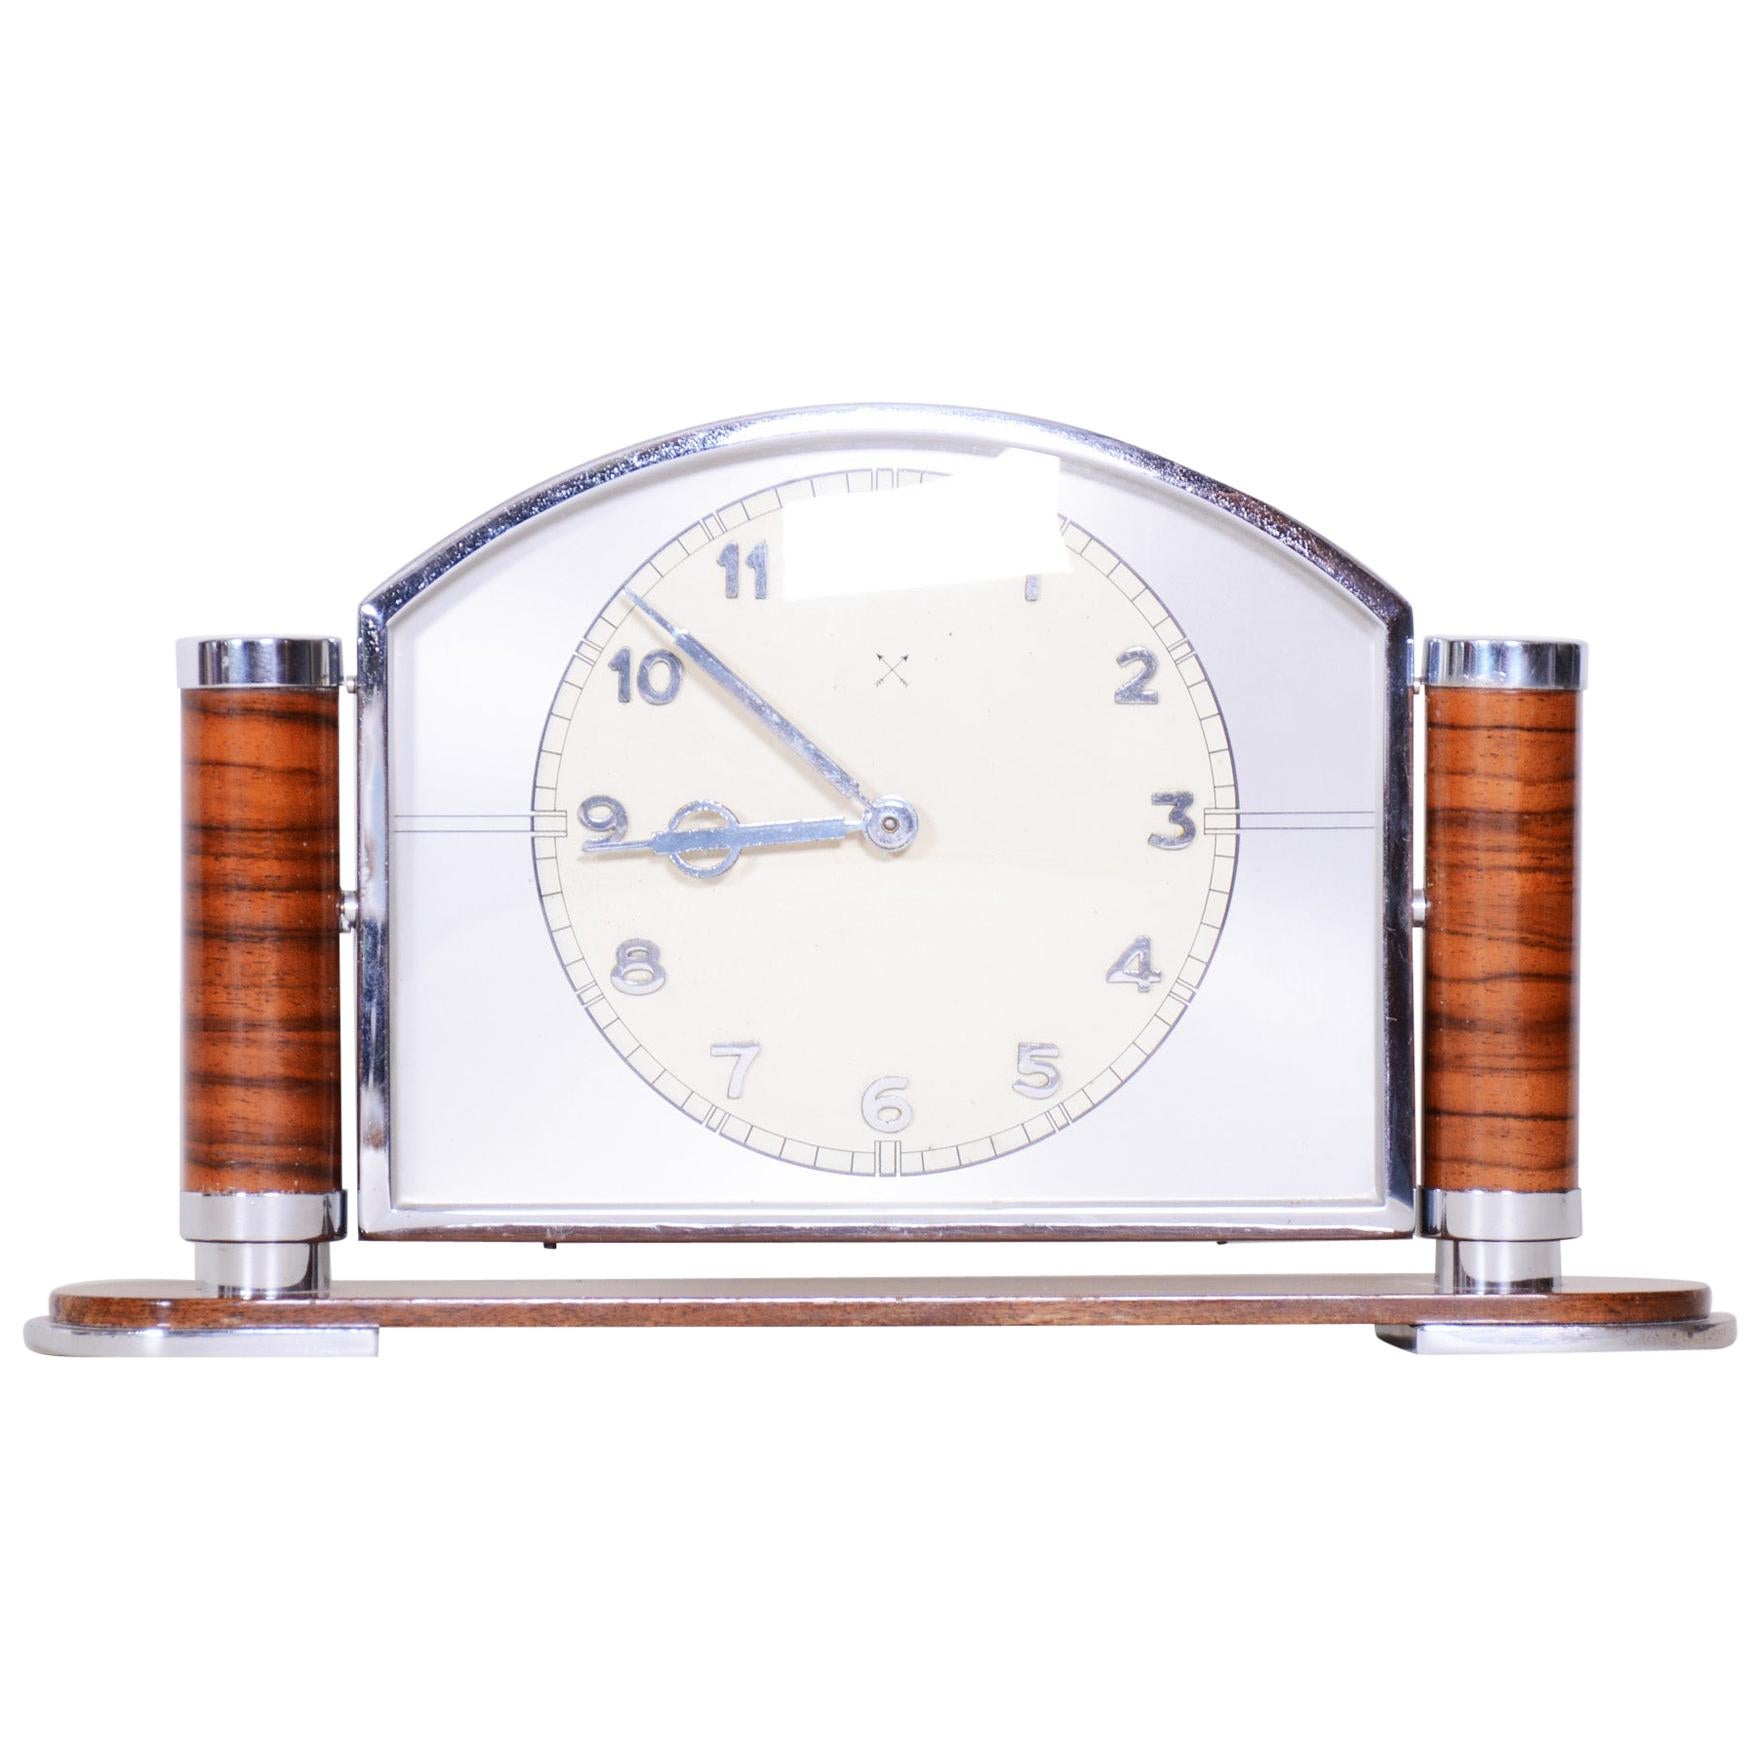 Unique French Art Deco Walnut Table Clock High Gloss, Preserved Condition, 1930s